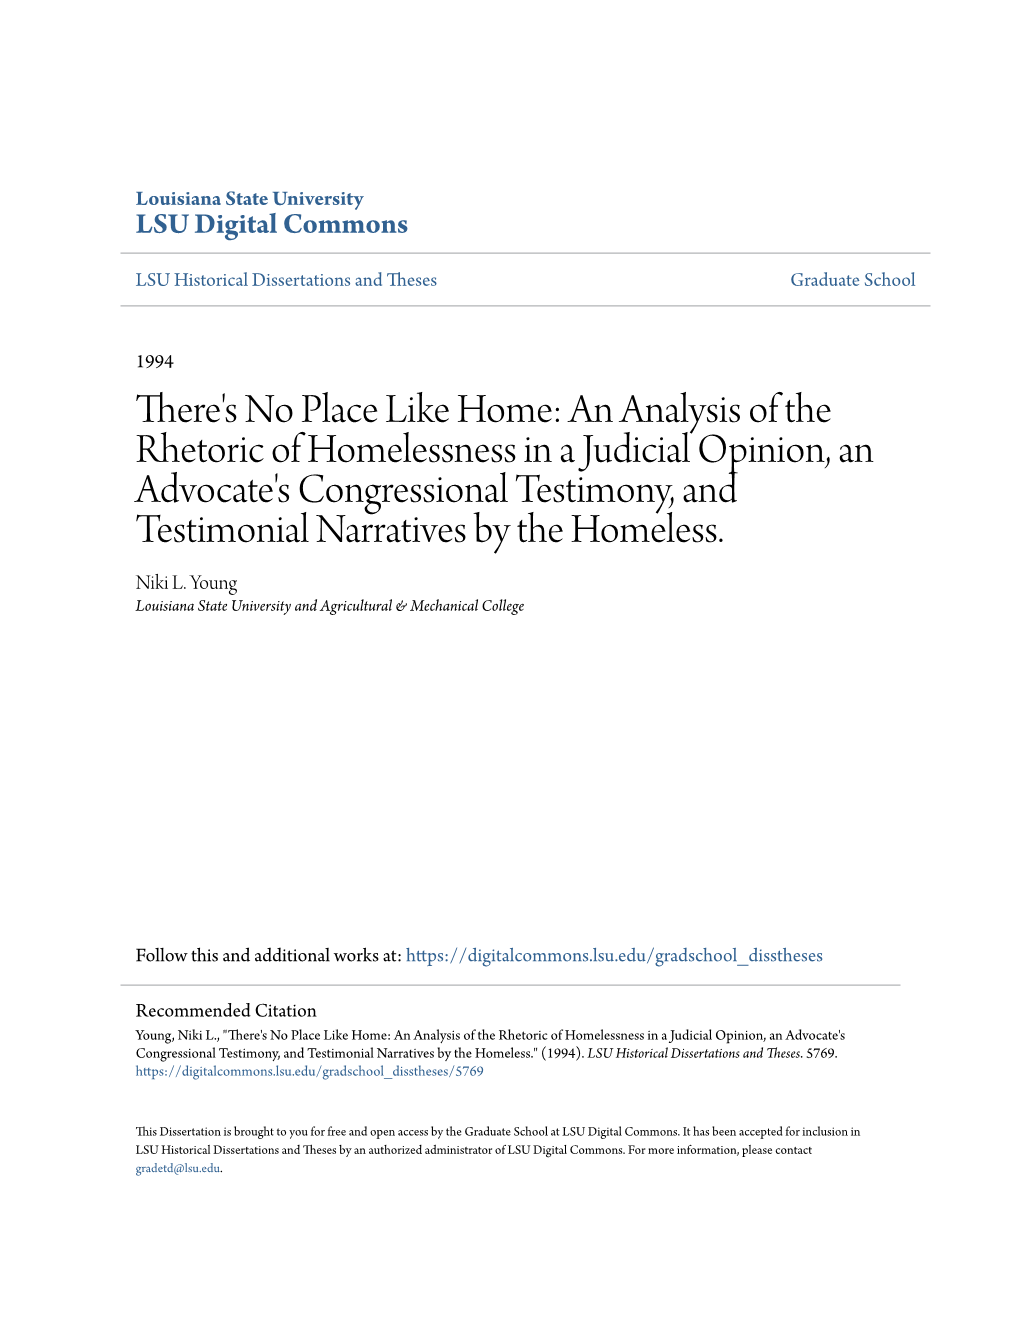 An Analysis of the Rhetoric of Homelessness in a Judicial Opinion, an Advocate's Congressional Testimony, and Testimonial Narratives by the Homeless